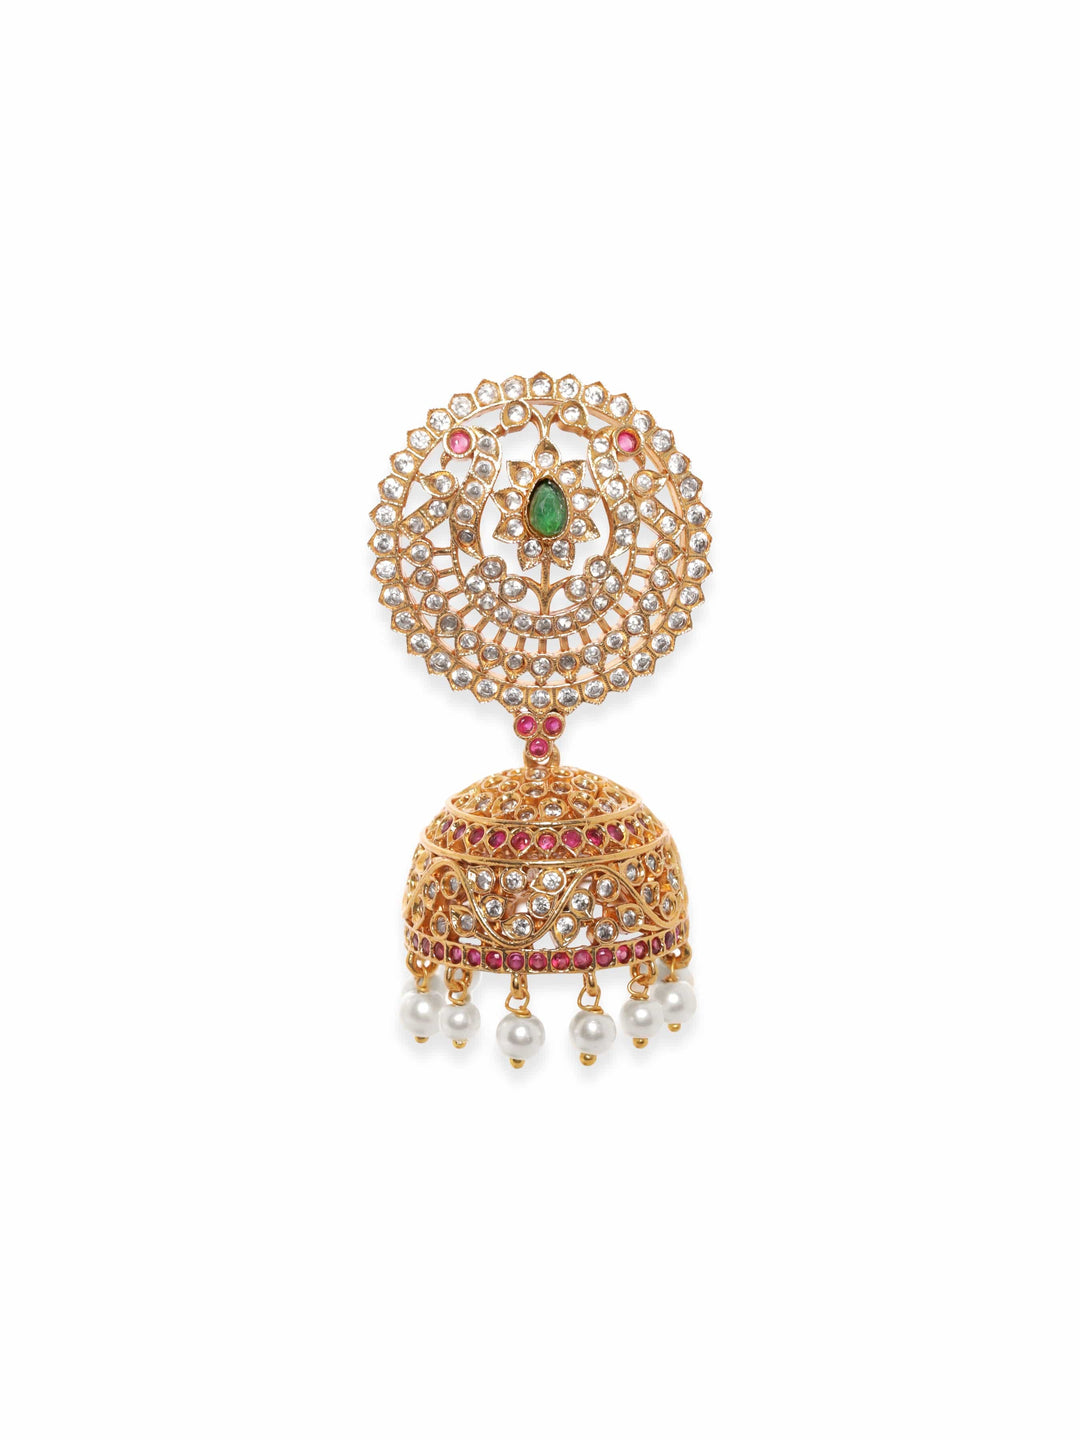 Rubans 22K Gold plated Ruby & Emerald Zirconia Hand Crafted Statement Temple Jhumka Earrings Earrings